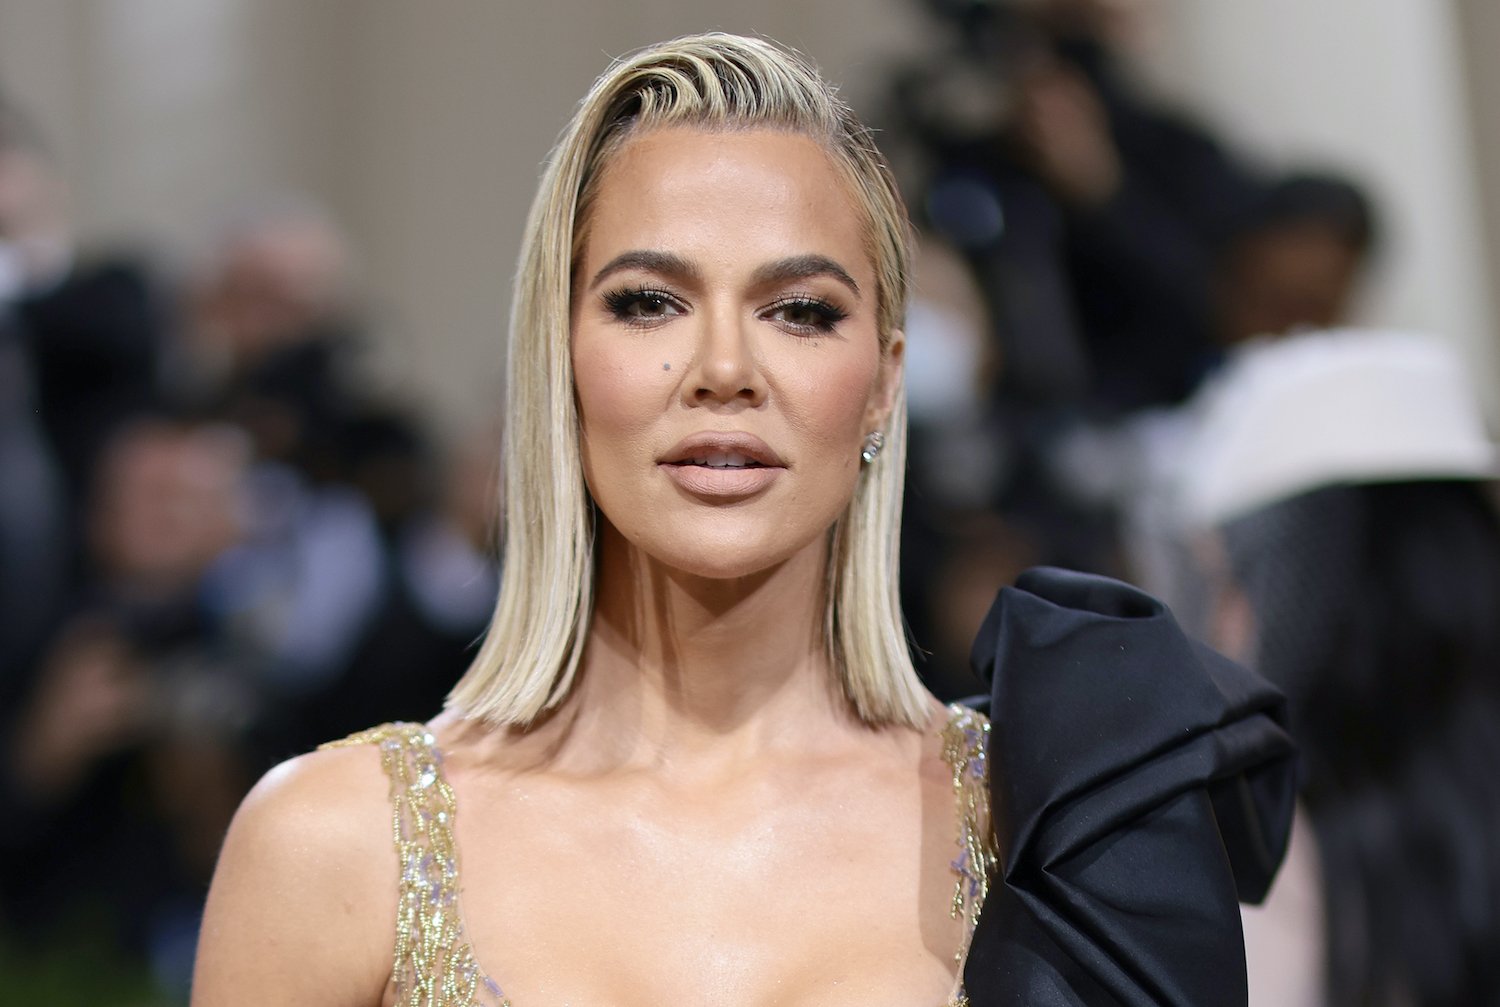 Khloe Kardashian, who appeared on 'Hot Ones,' poses at the 2022 Met Gala wearing a gold sequin dress